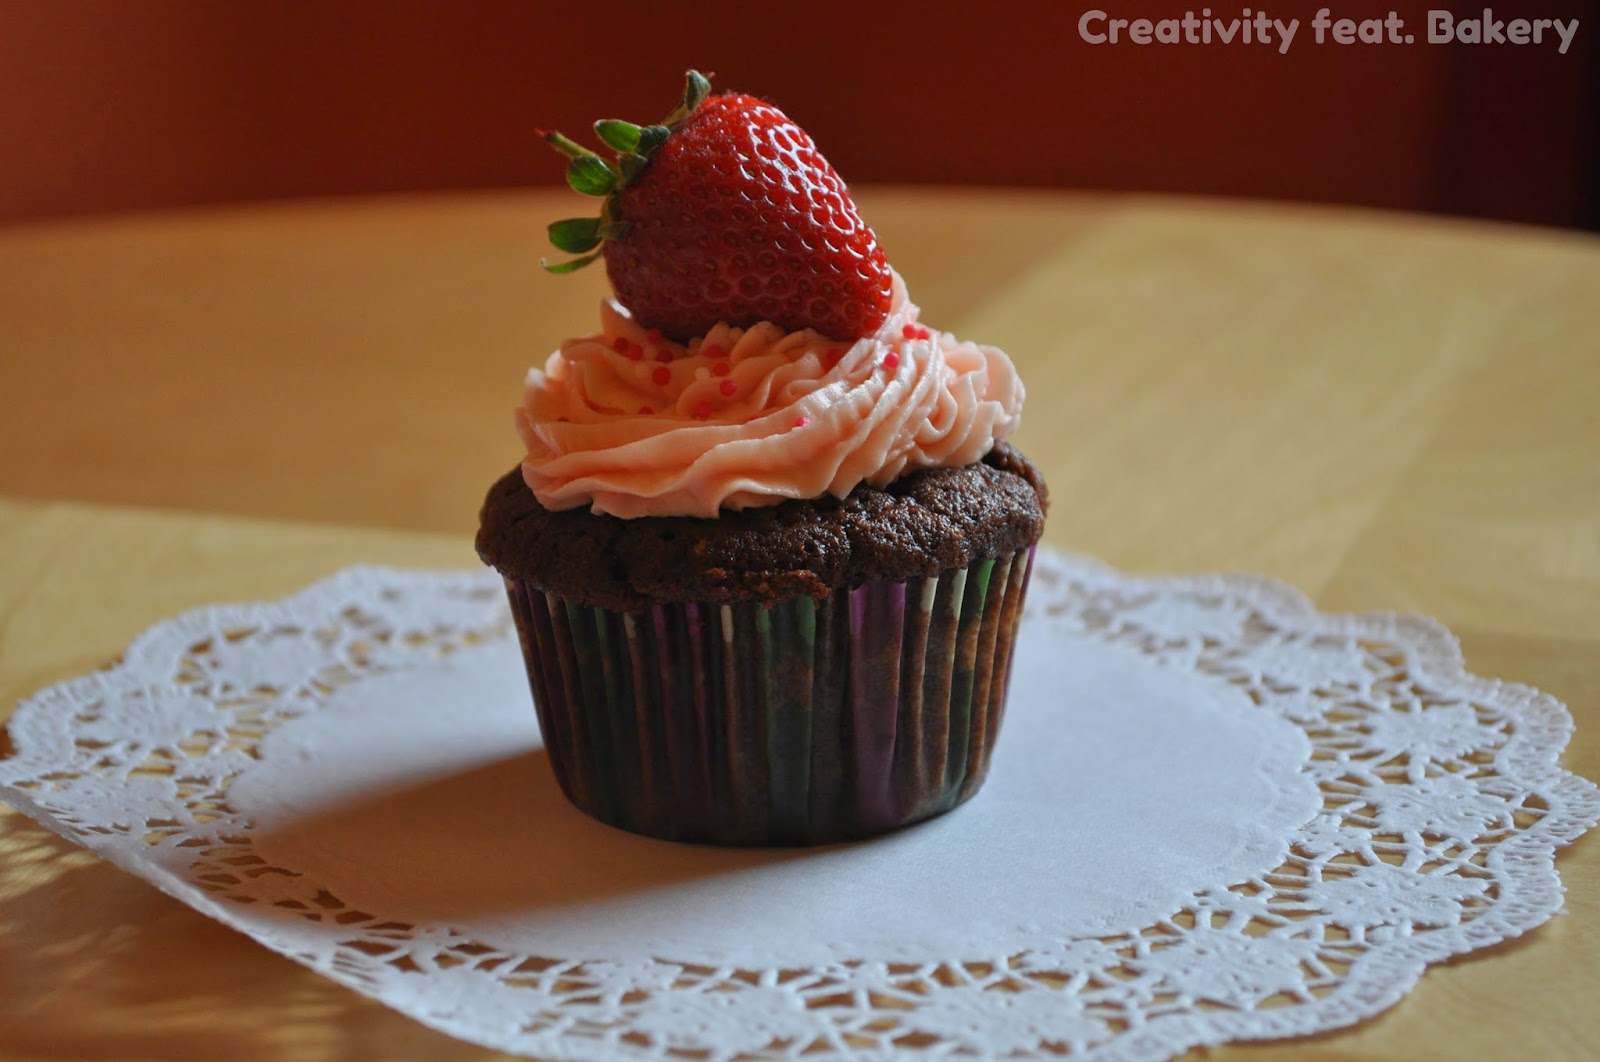 Creativity feat. Bakery: Schoko-Cupcakes mit Buttercreme-Topping